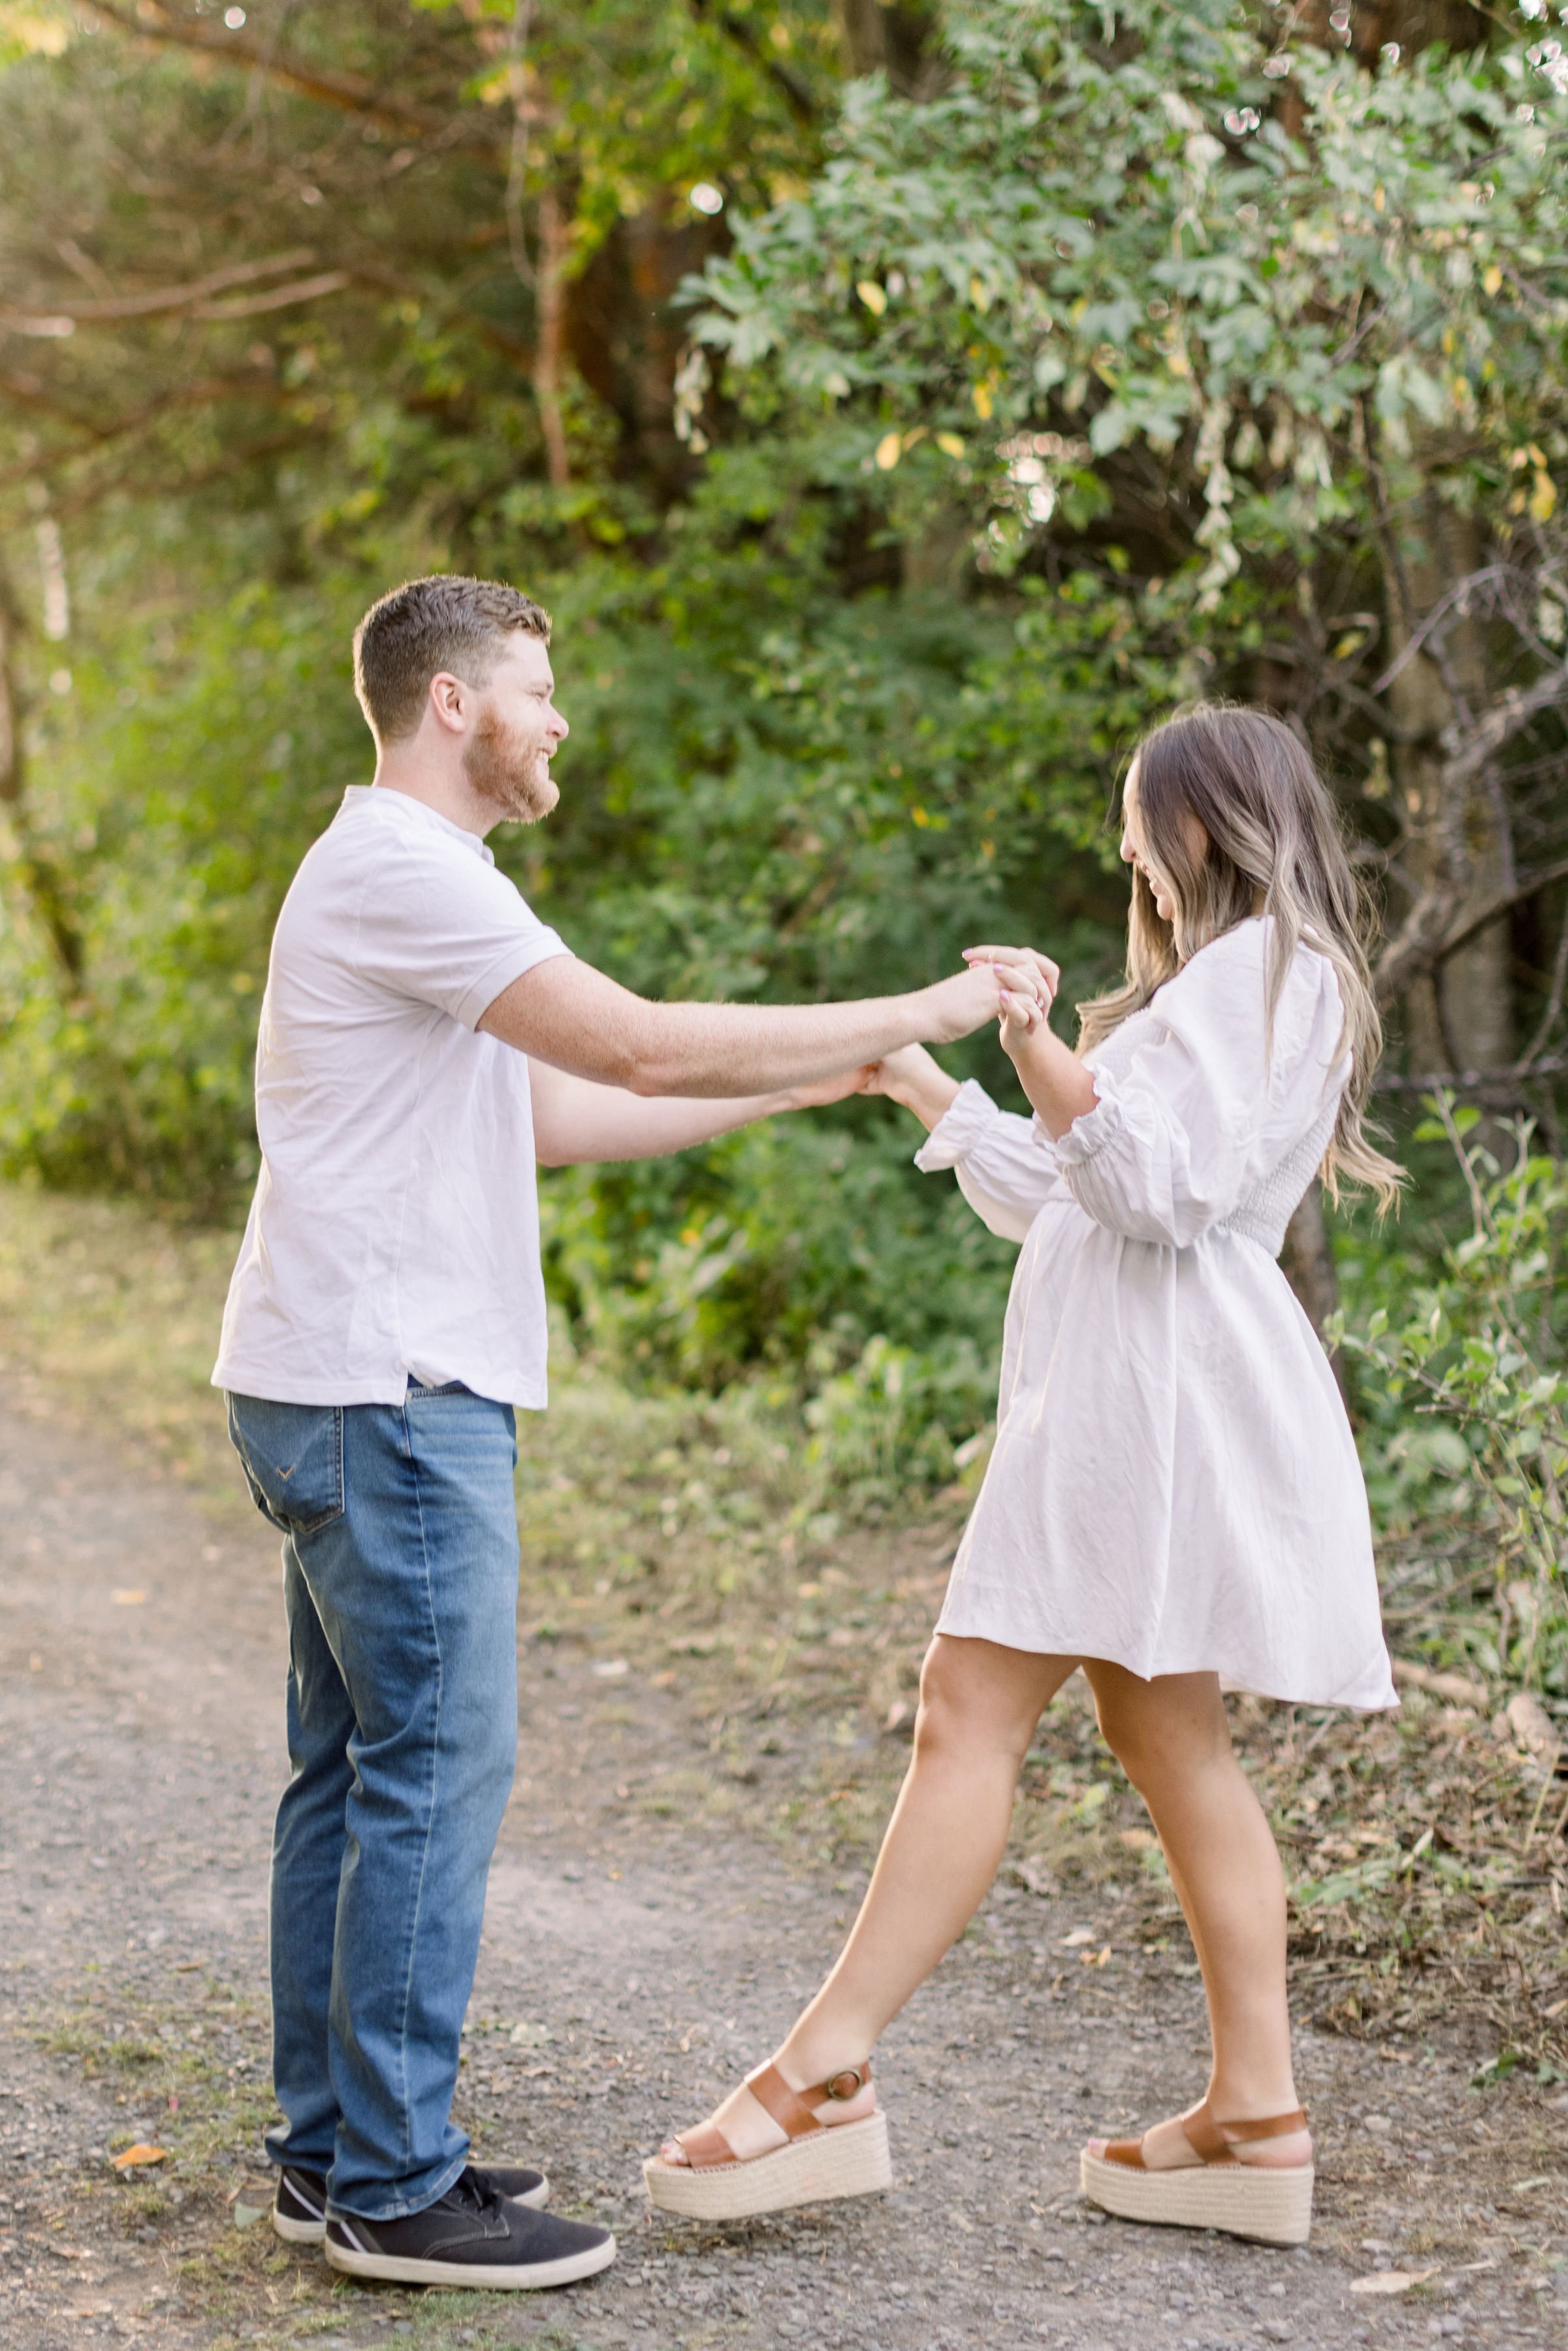  Chelsea Mason Photography captures an engaged couple dancing together under some trees in Ottawa. Ottawa engagements #ChelseaMasonPhotography #ChelseaMasonEngagements #Ottawaphotographers #ArboretumOttawaEngagments #weddingannouncementportraits 